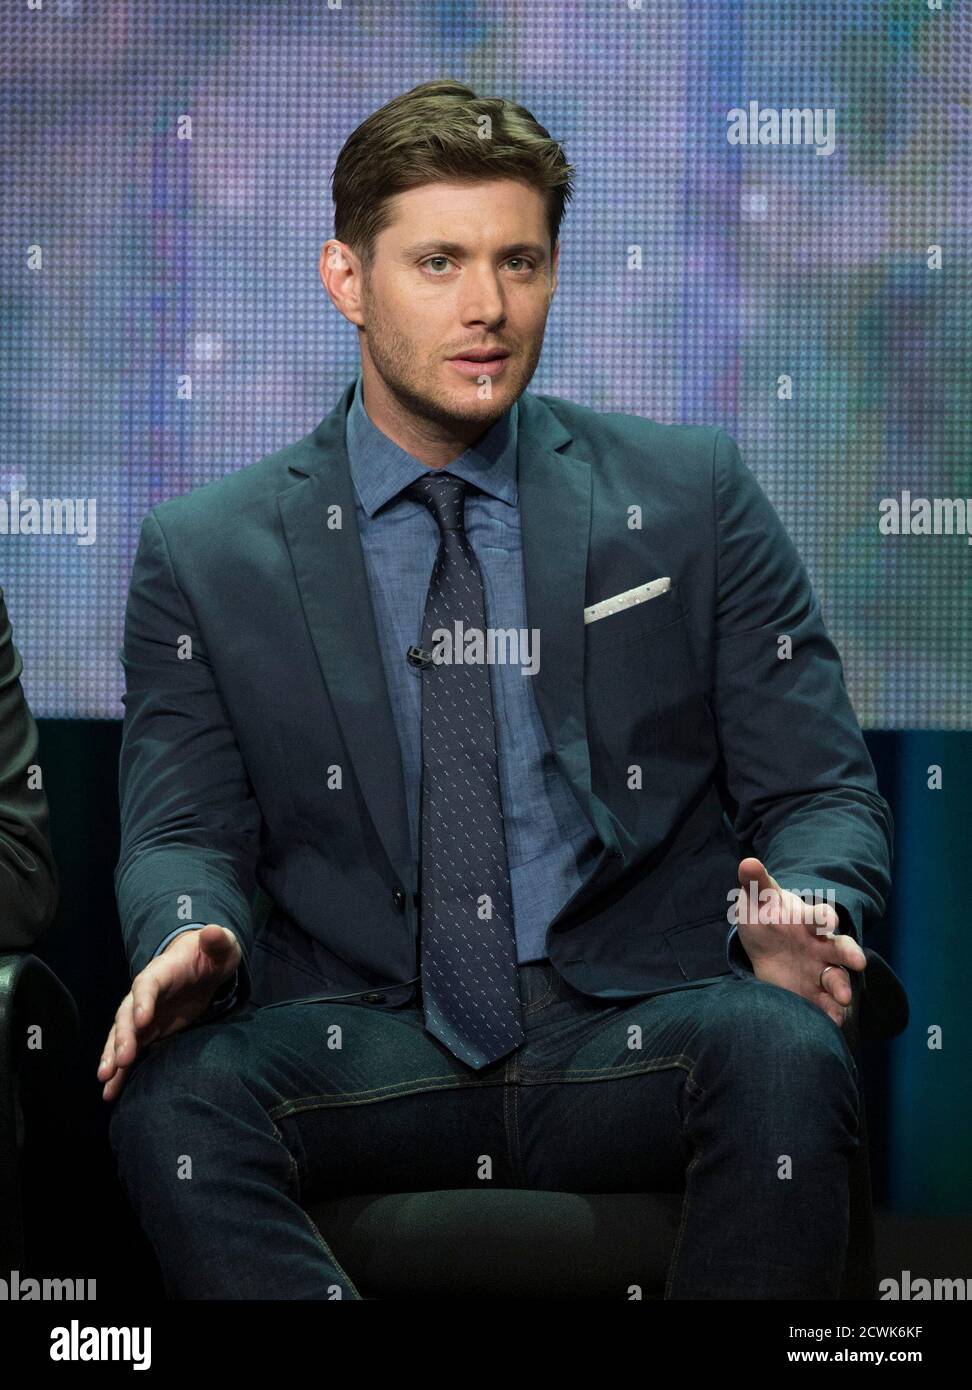 Cast member Jensen Ackles speaks at a panel for The CW television series  "Supernatural" during the Television Critics Association Cable Summer Press  Tour in Beverly Hills, California July 18, 2014. REUTERS/Mario Anzuoni (